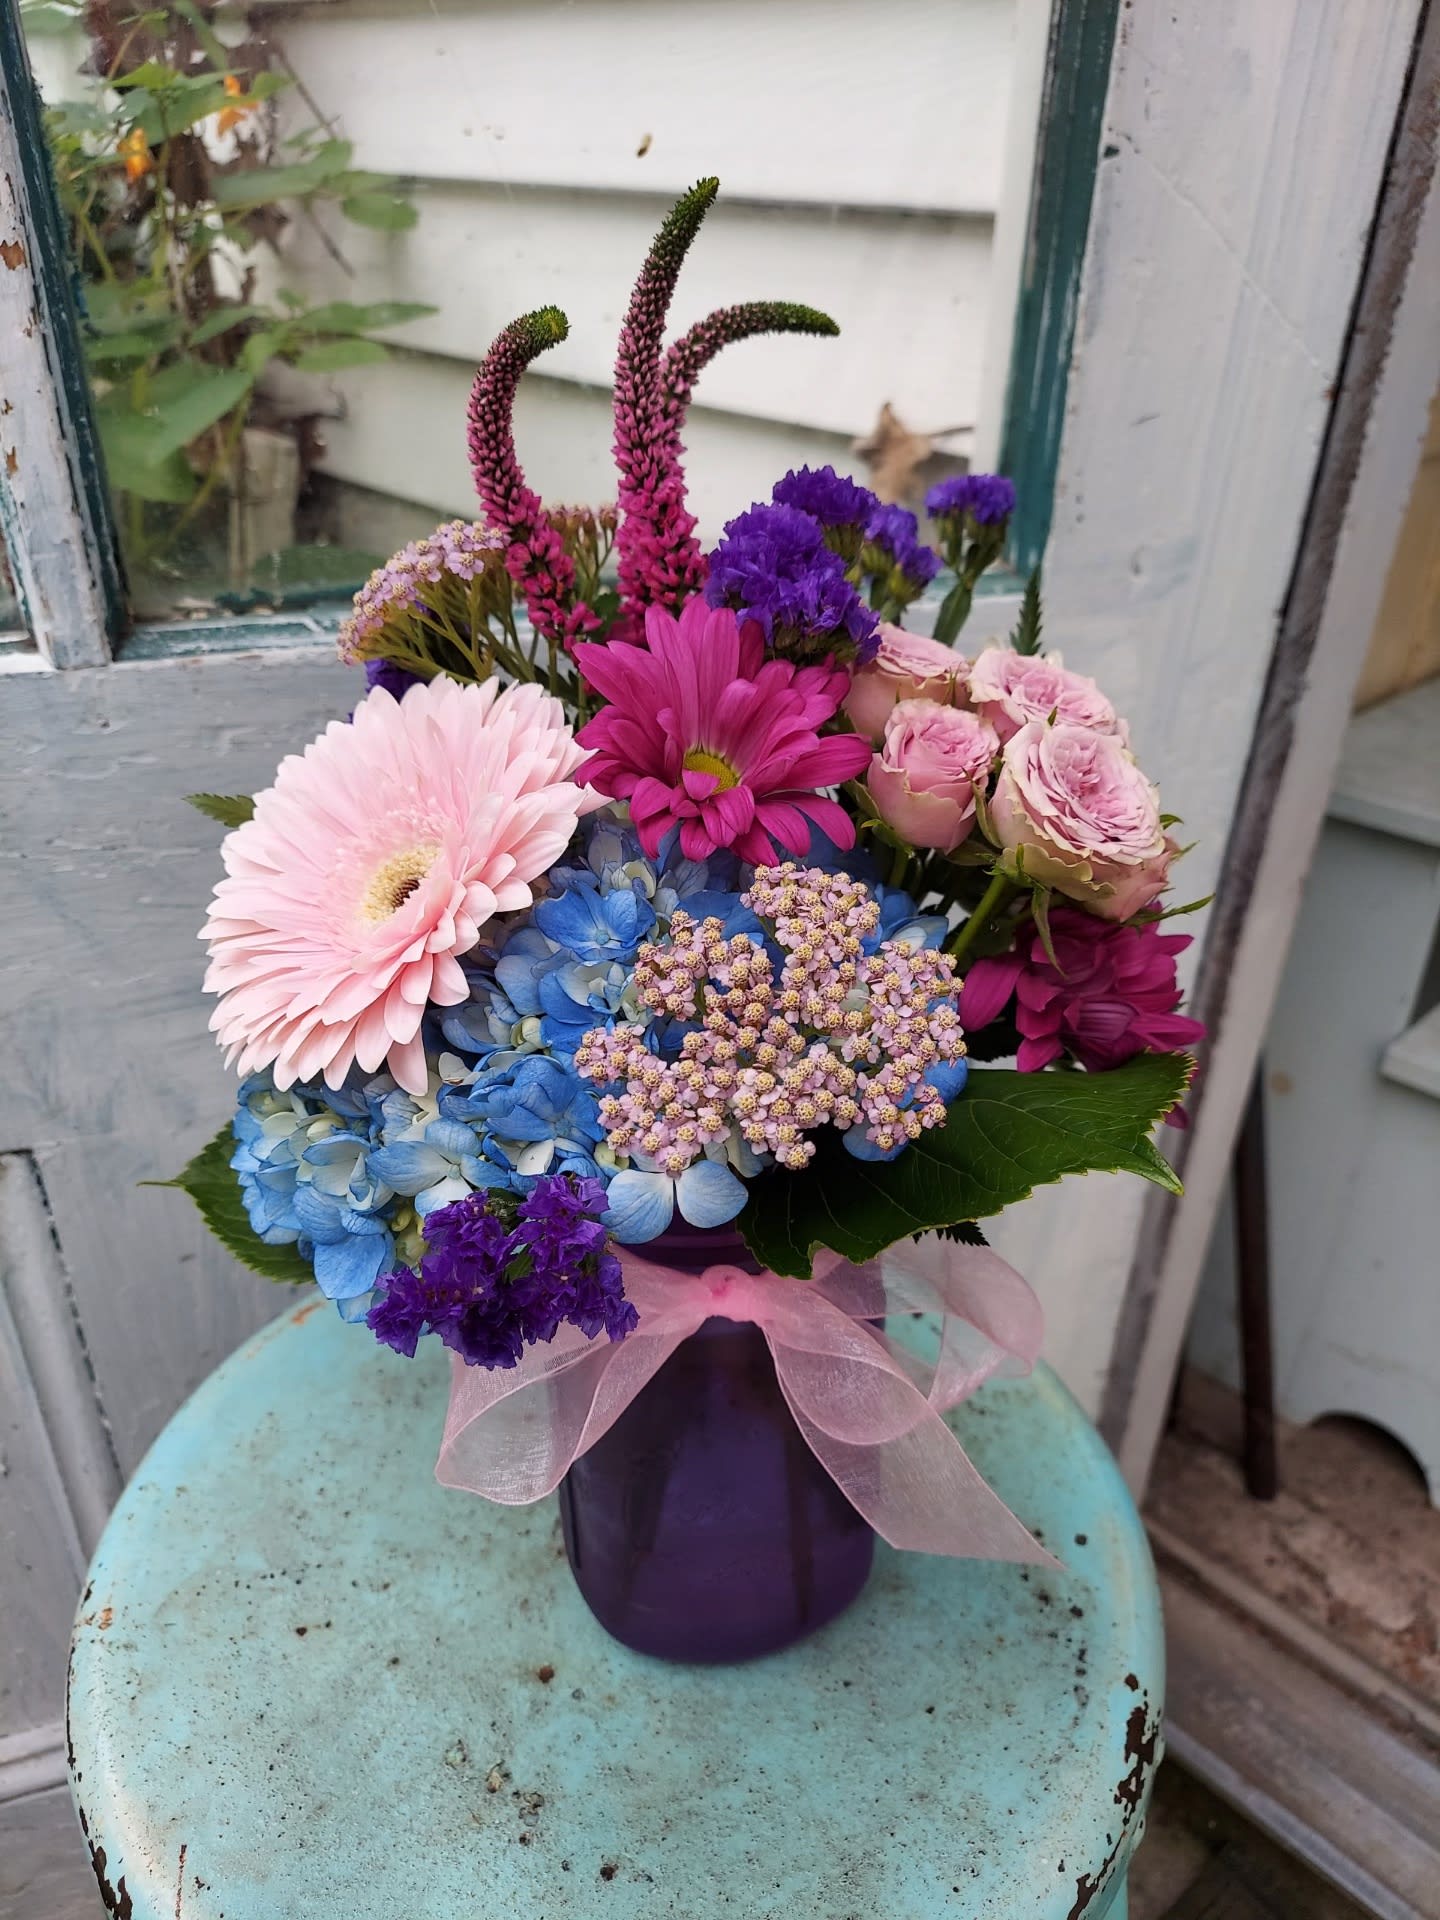 She's A Gem - This jeweled-toned arrangement in tones of amesthyst, emerald, sapphire and ruby.  The perfect gem for just about any occasion.